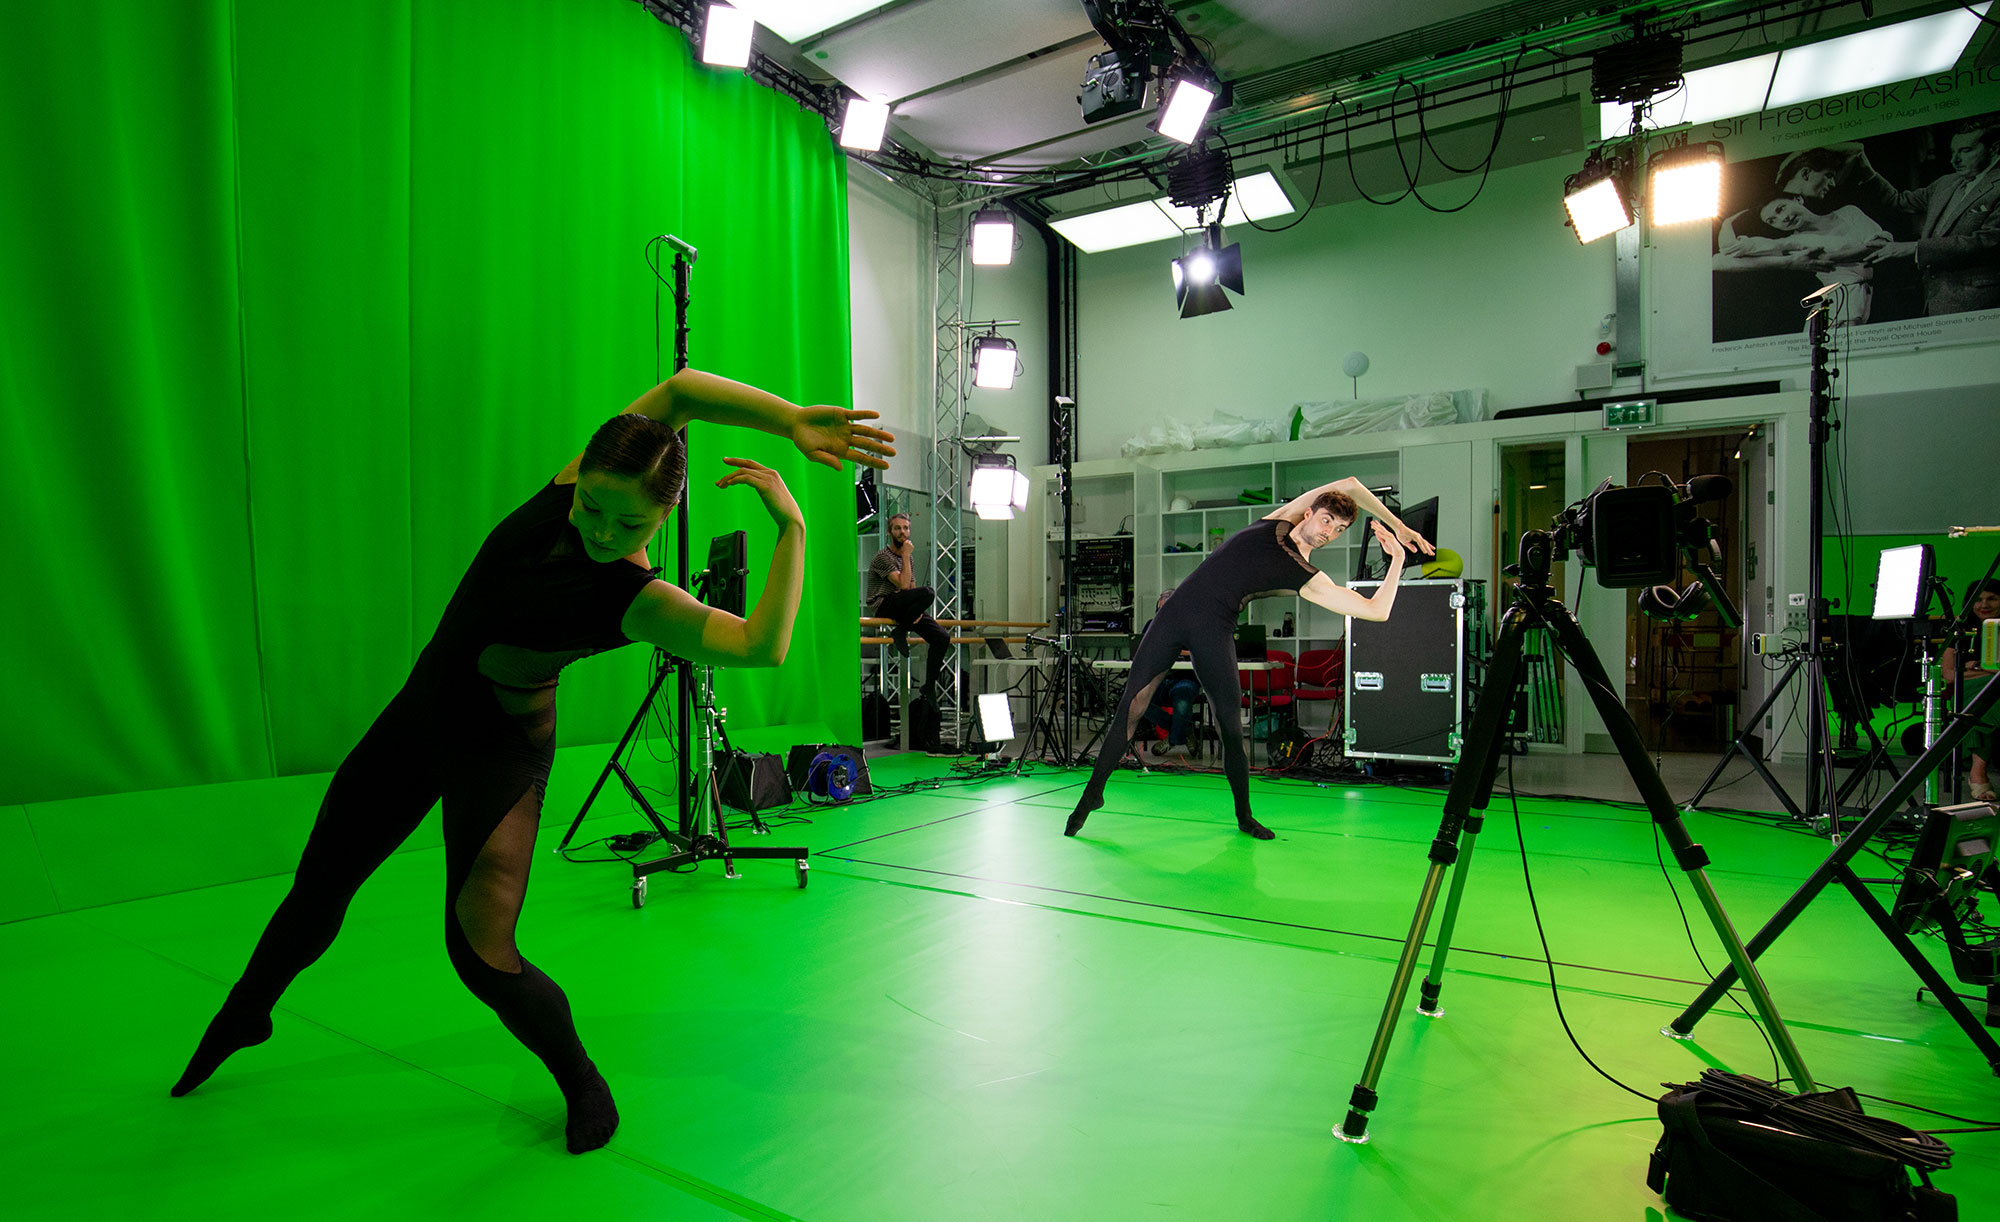 Two dancers performing in front of a green screen